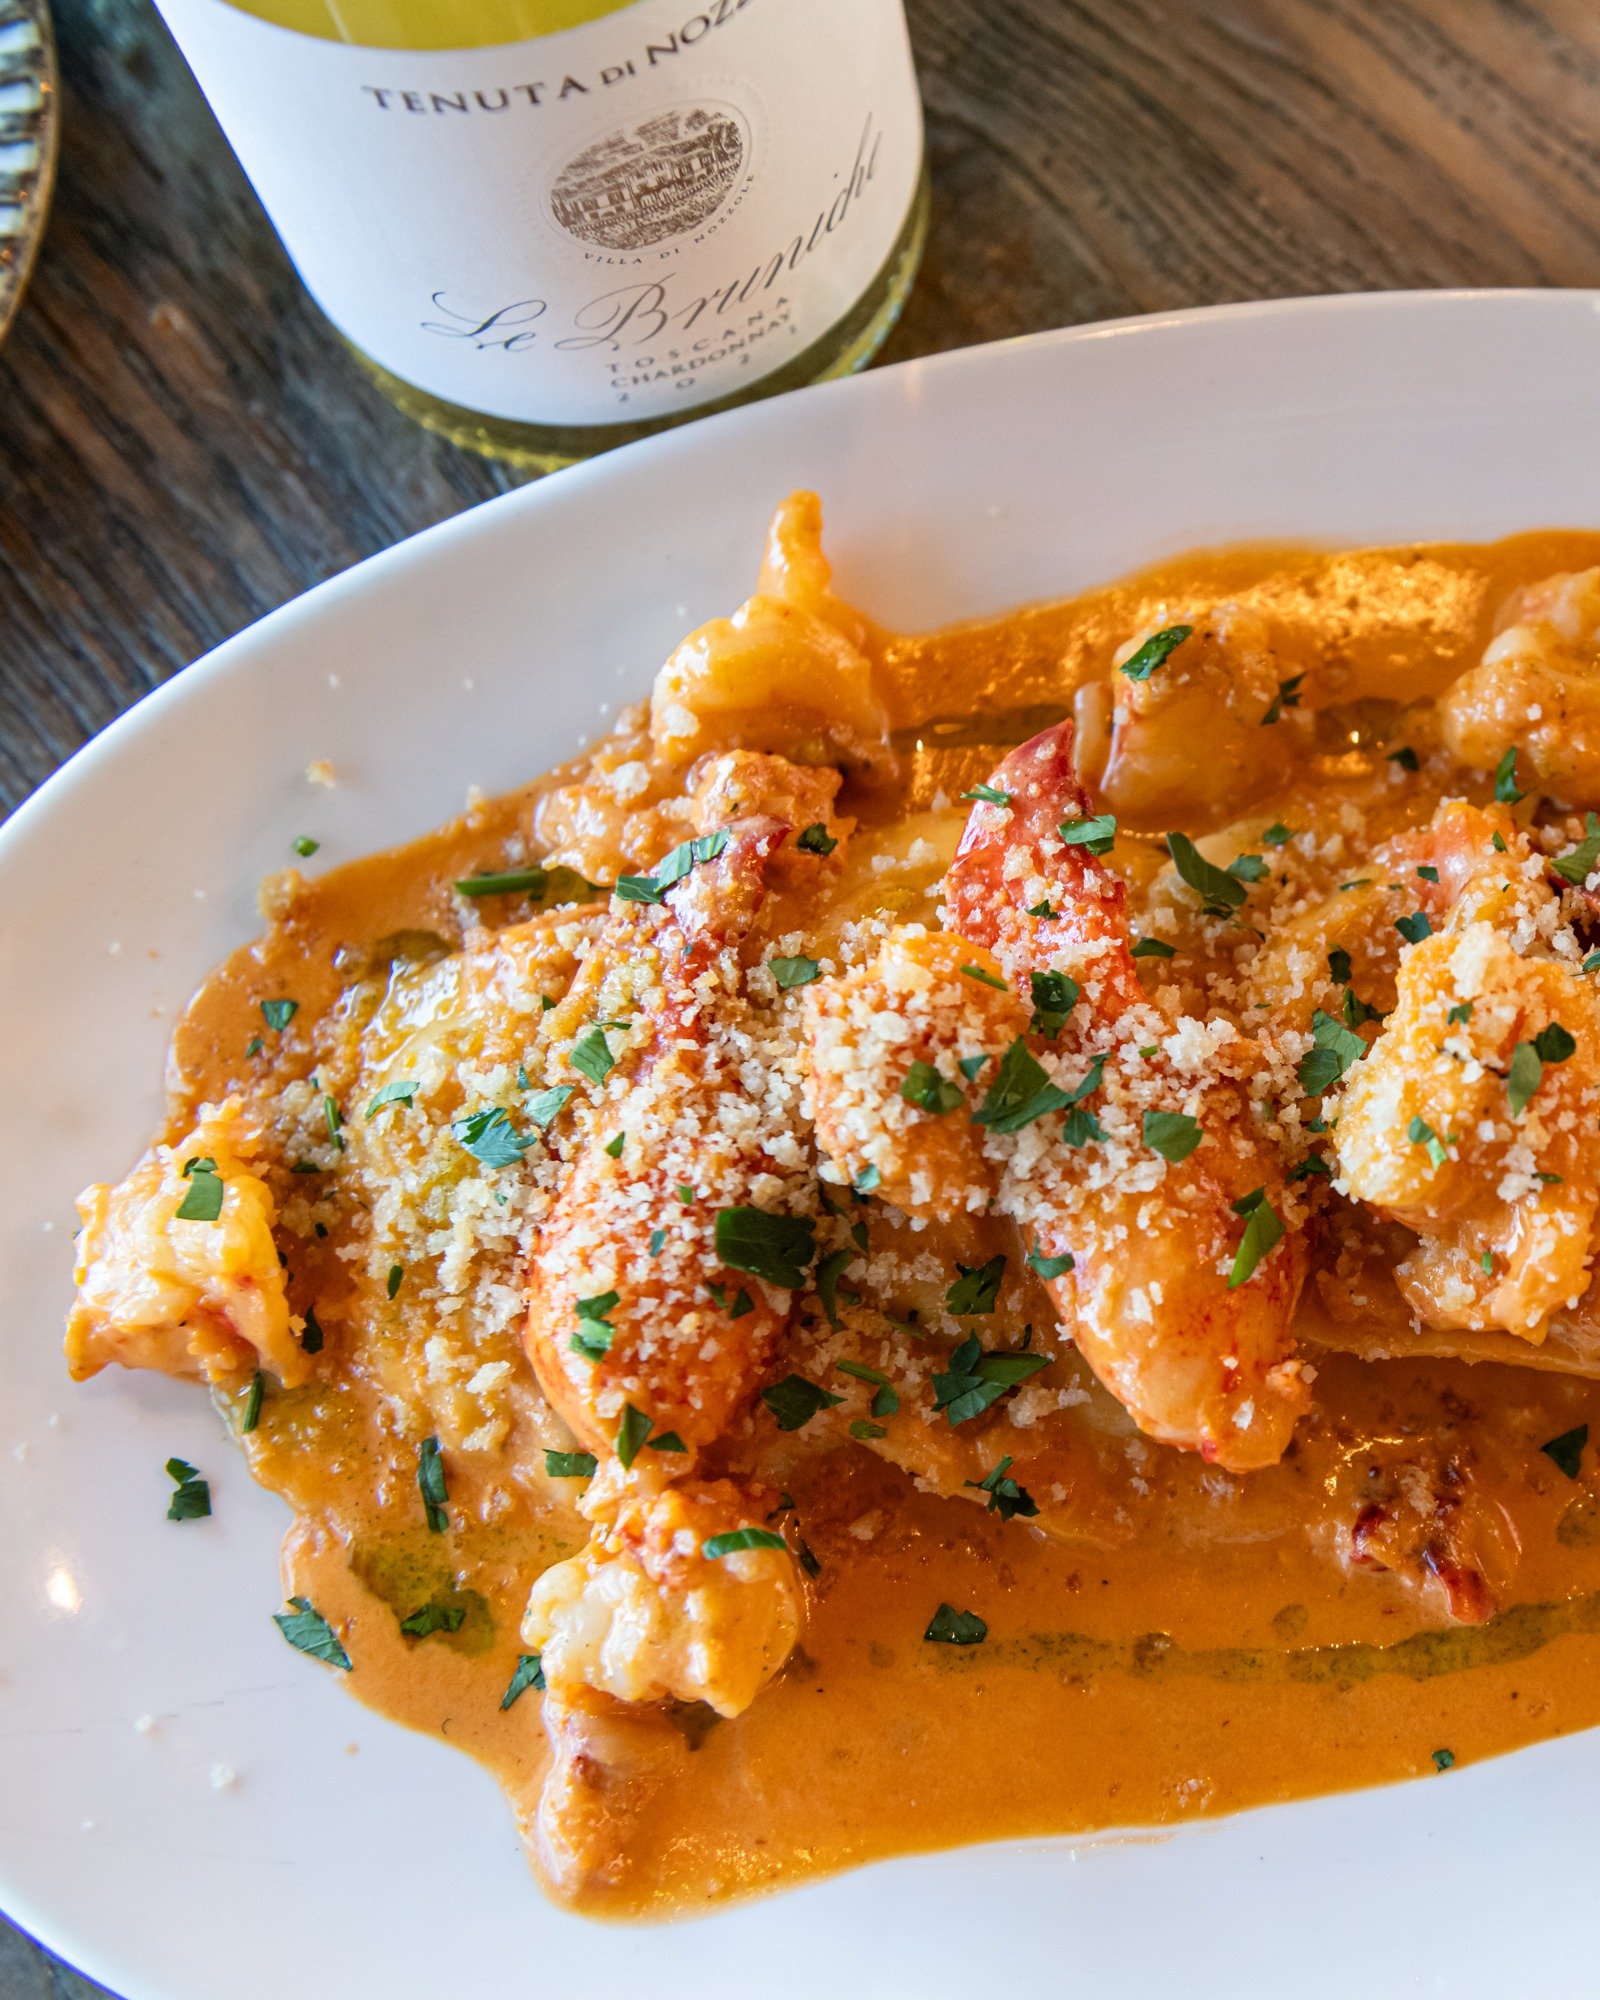 To say we're obsessed with our new Ravioli All'Aragosta would be a huge understatement. We literally can't get enough! 

This masterpiece is shrimp stuffed ravioli, with cherry tomatoes, garlic, parsley, lobster stock, lobster knuckle, and uni butter